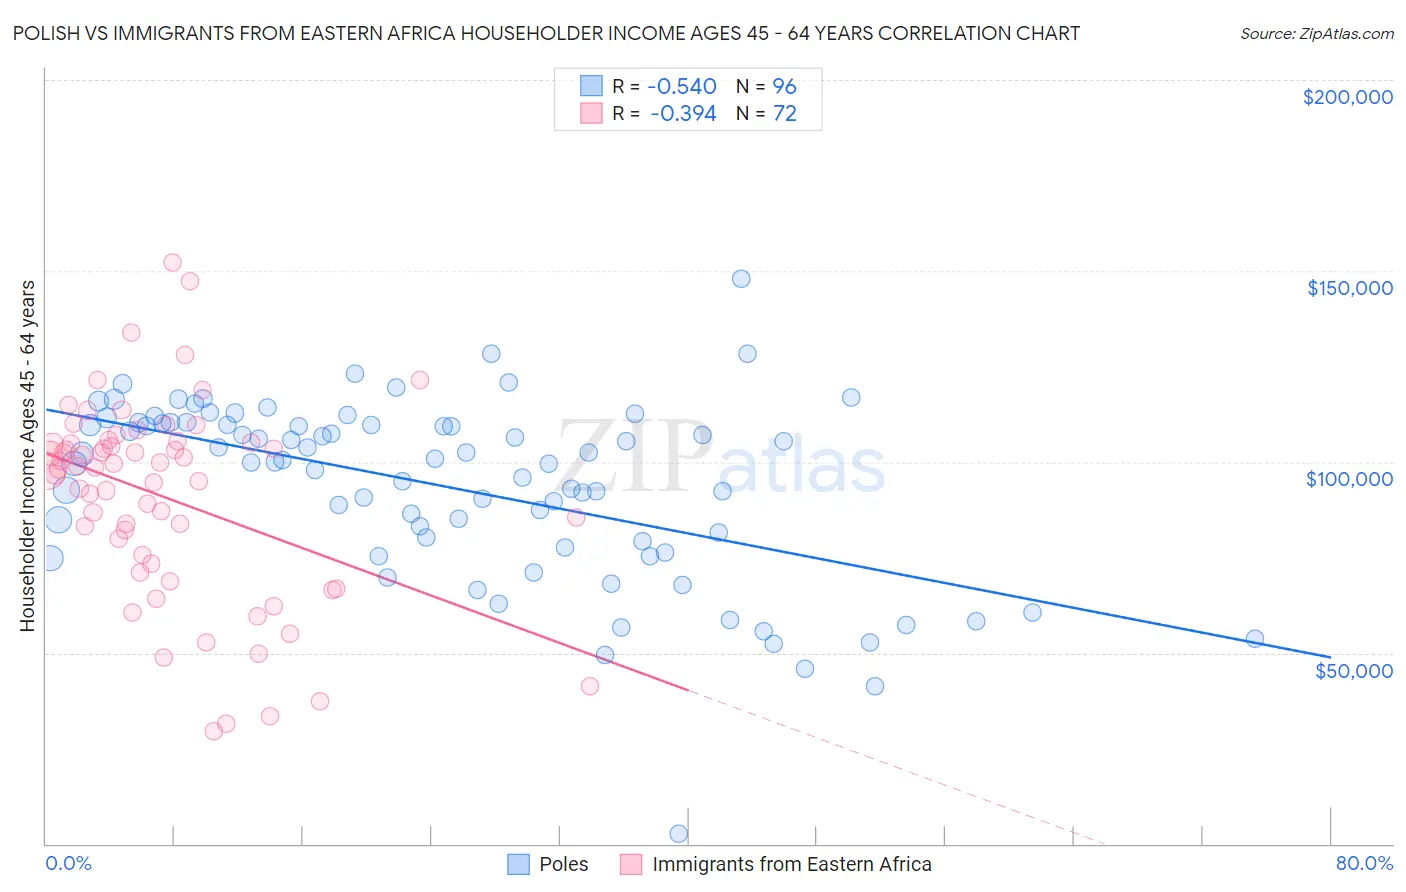 Polish vs Immigrants from Eastern Africa Householder Income Ages 45 - 64 years